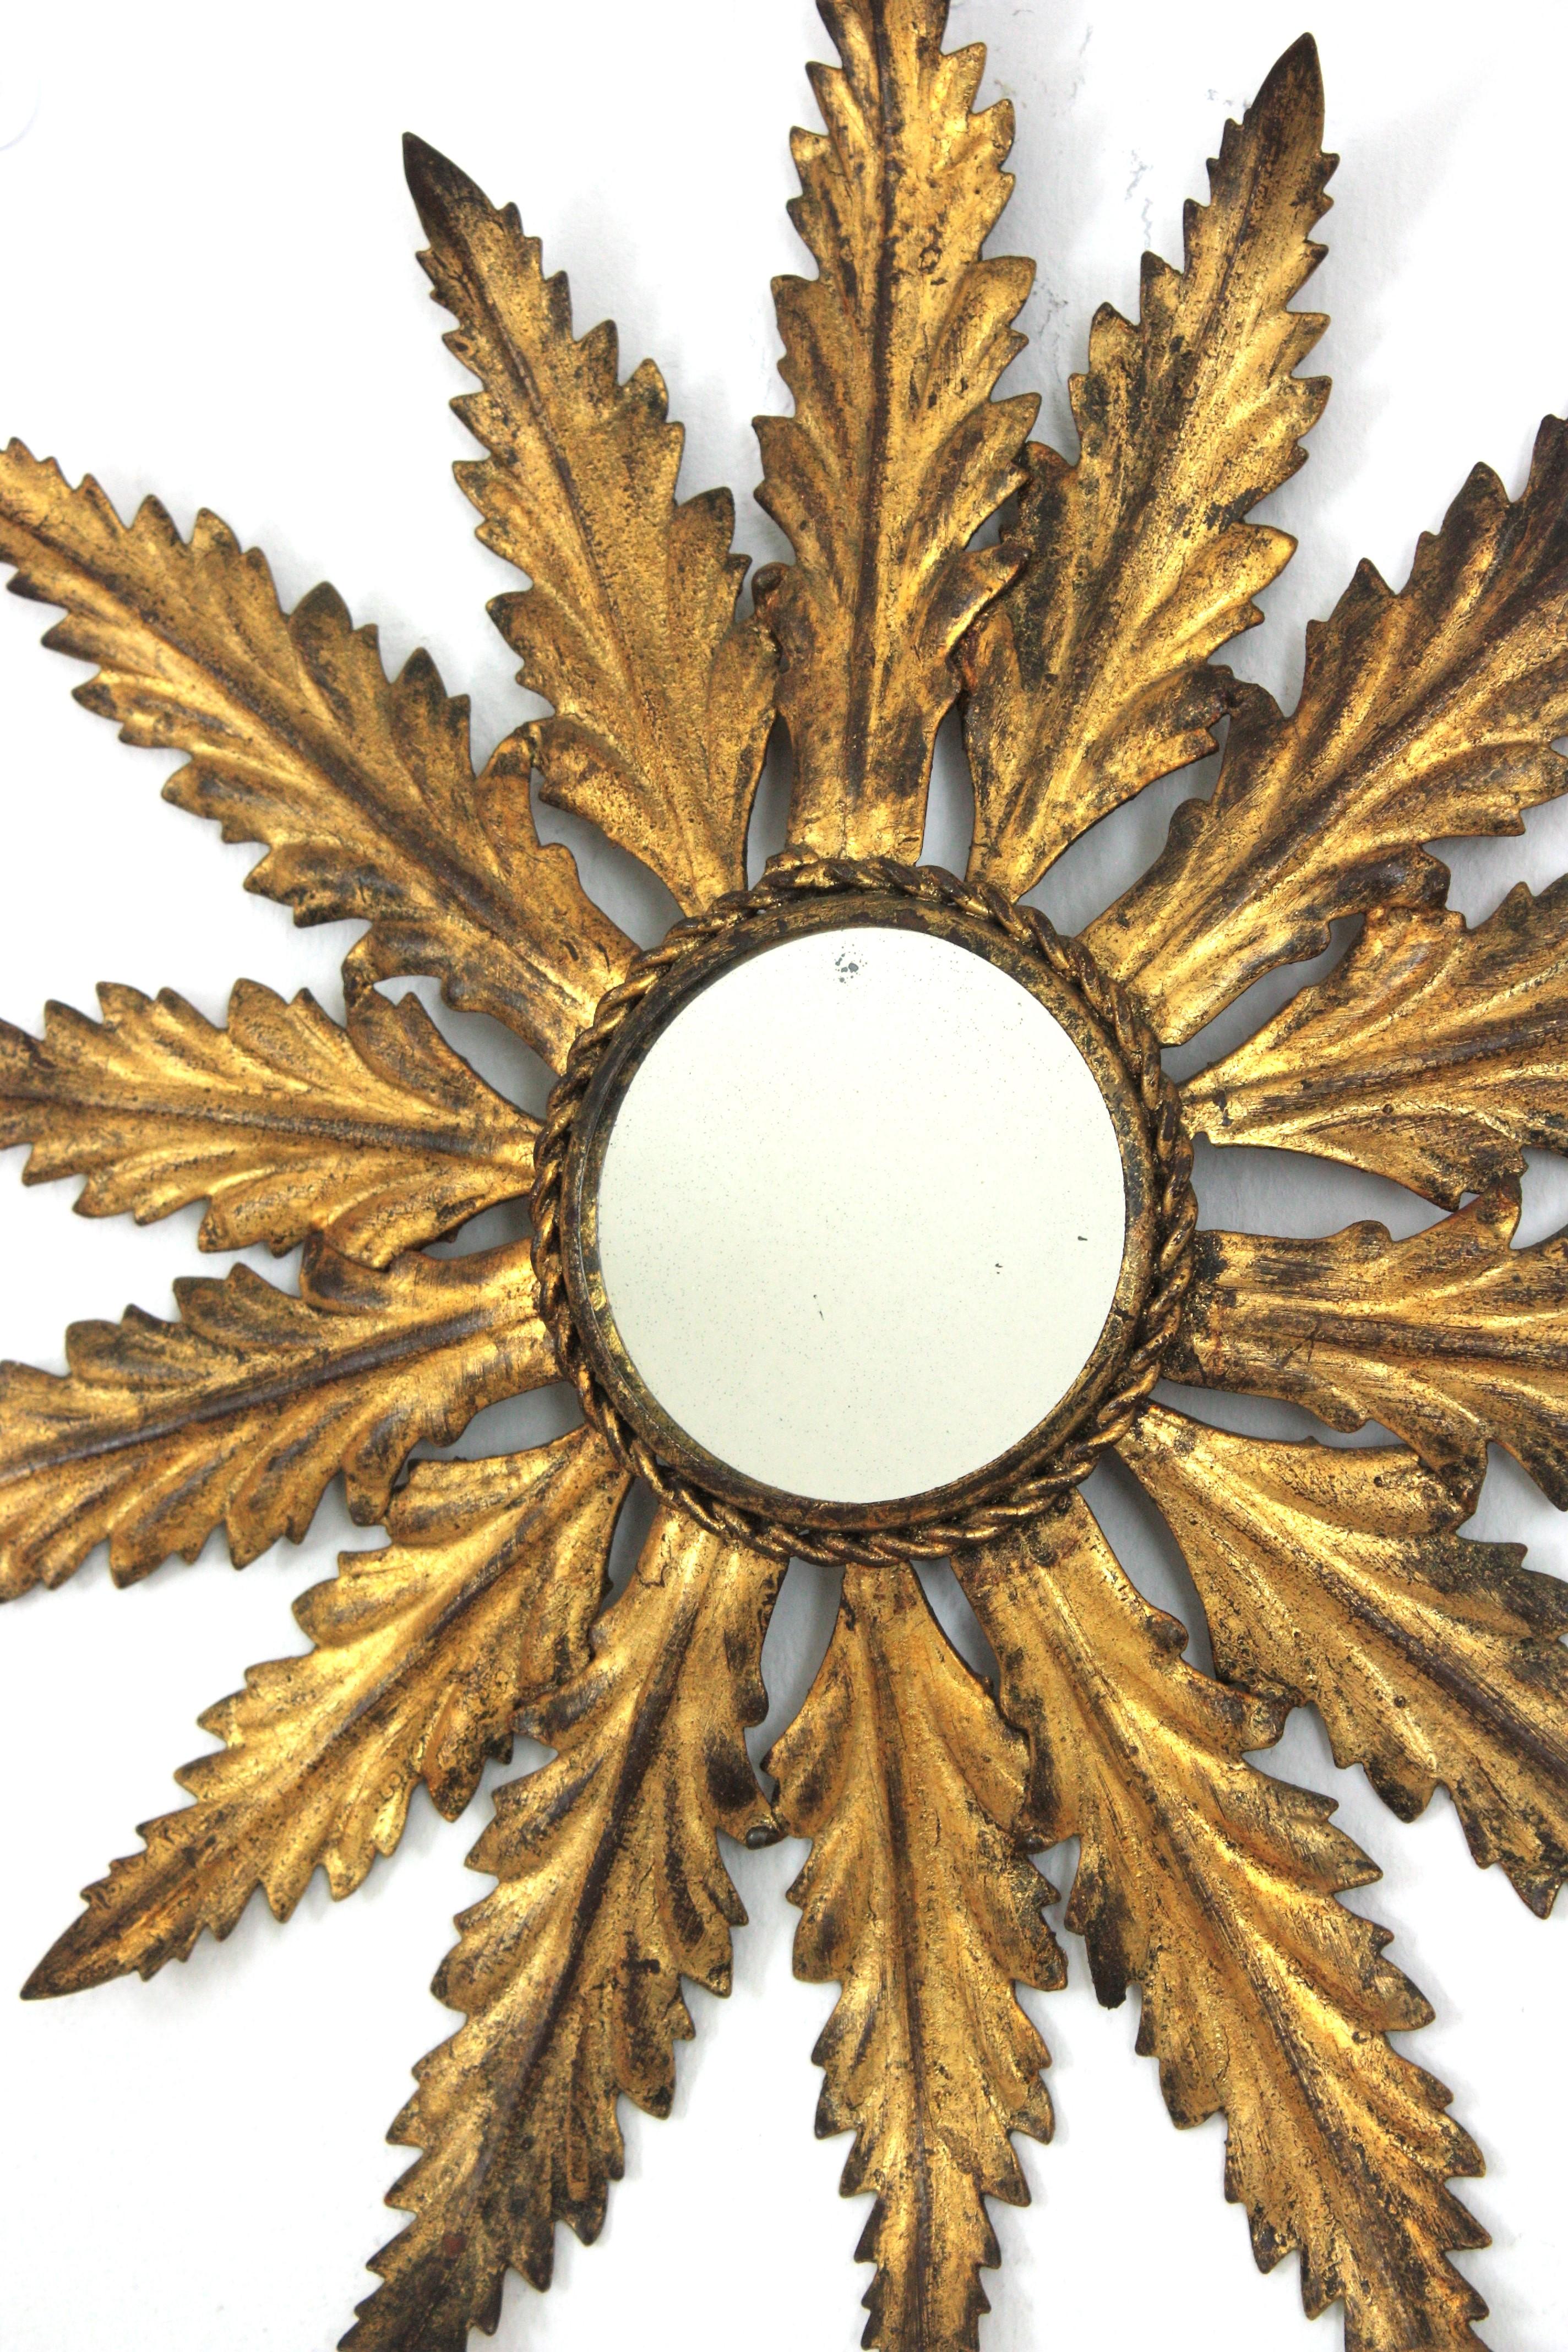 Hand-Crafted Spanish Leafed Sunburst Mirror in Gilt Metal, 1940s For Sale